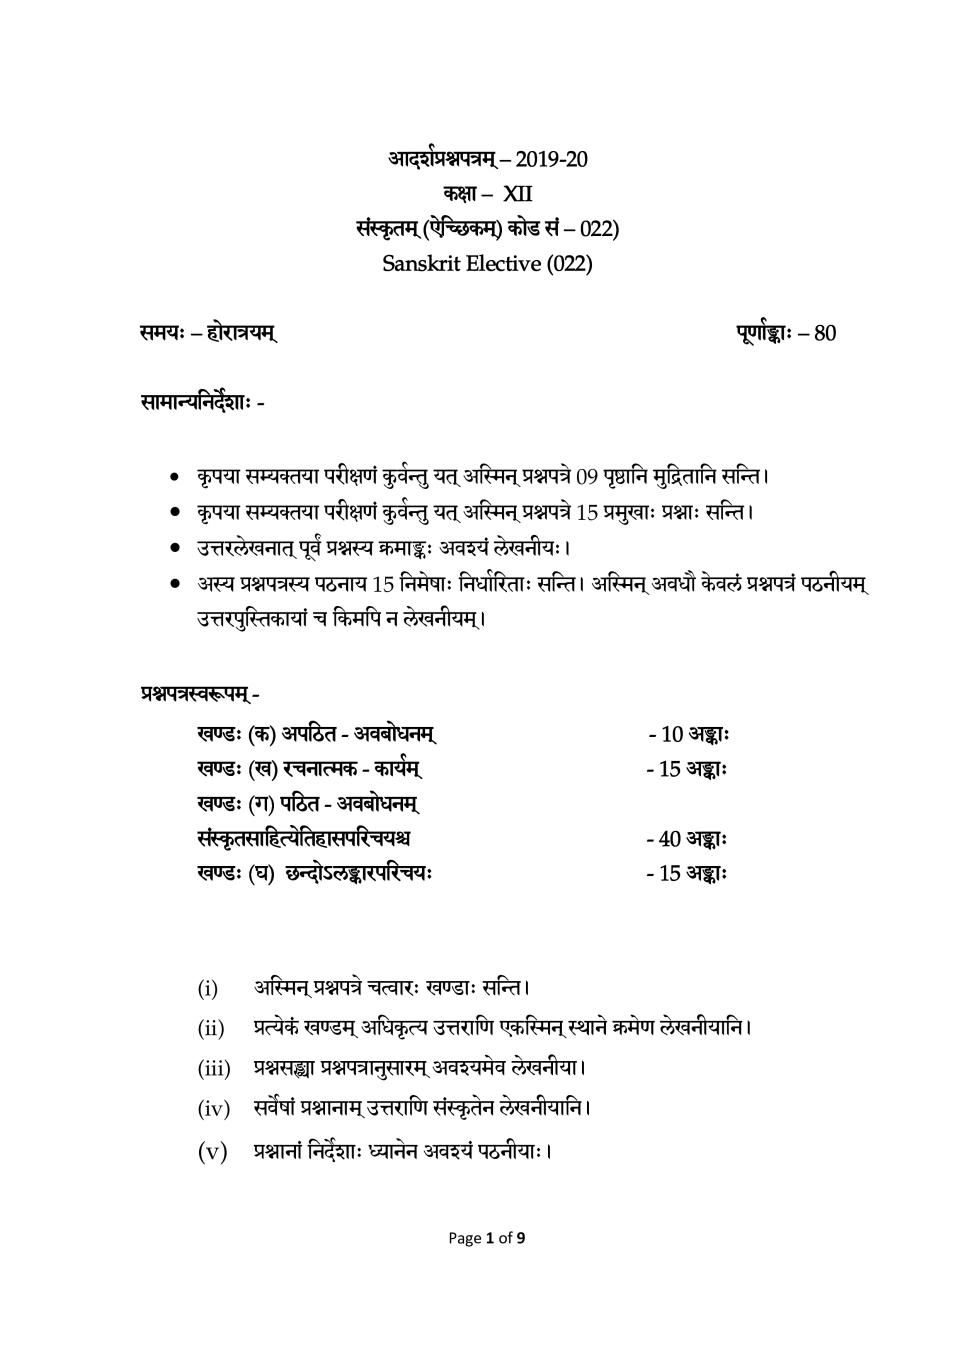 CBSE Class 12 Sample Paper 2020 for Sanskrit Elective - Page 1